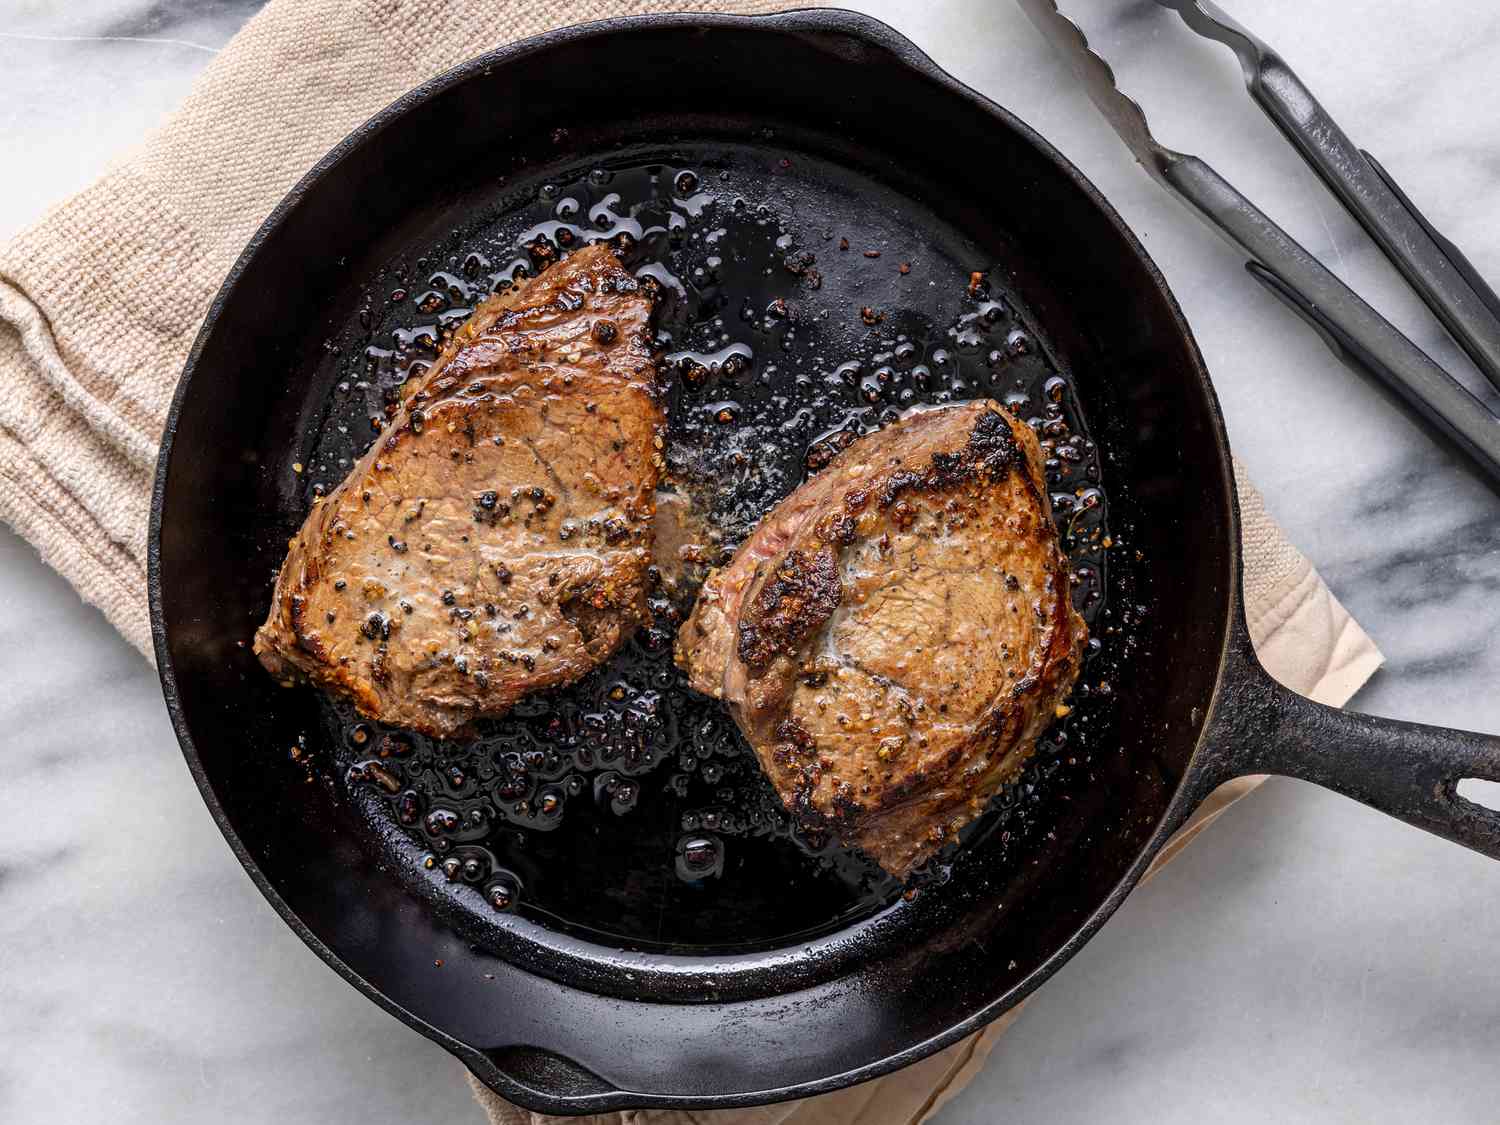 https://recipes.net/wp-content/uploads/2023/12/how-to-cook-steak-in-cast-iron-skillet-in-oven-1701841516.jpg